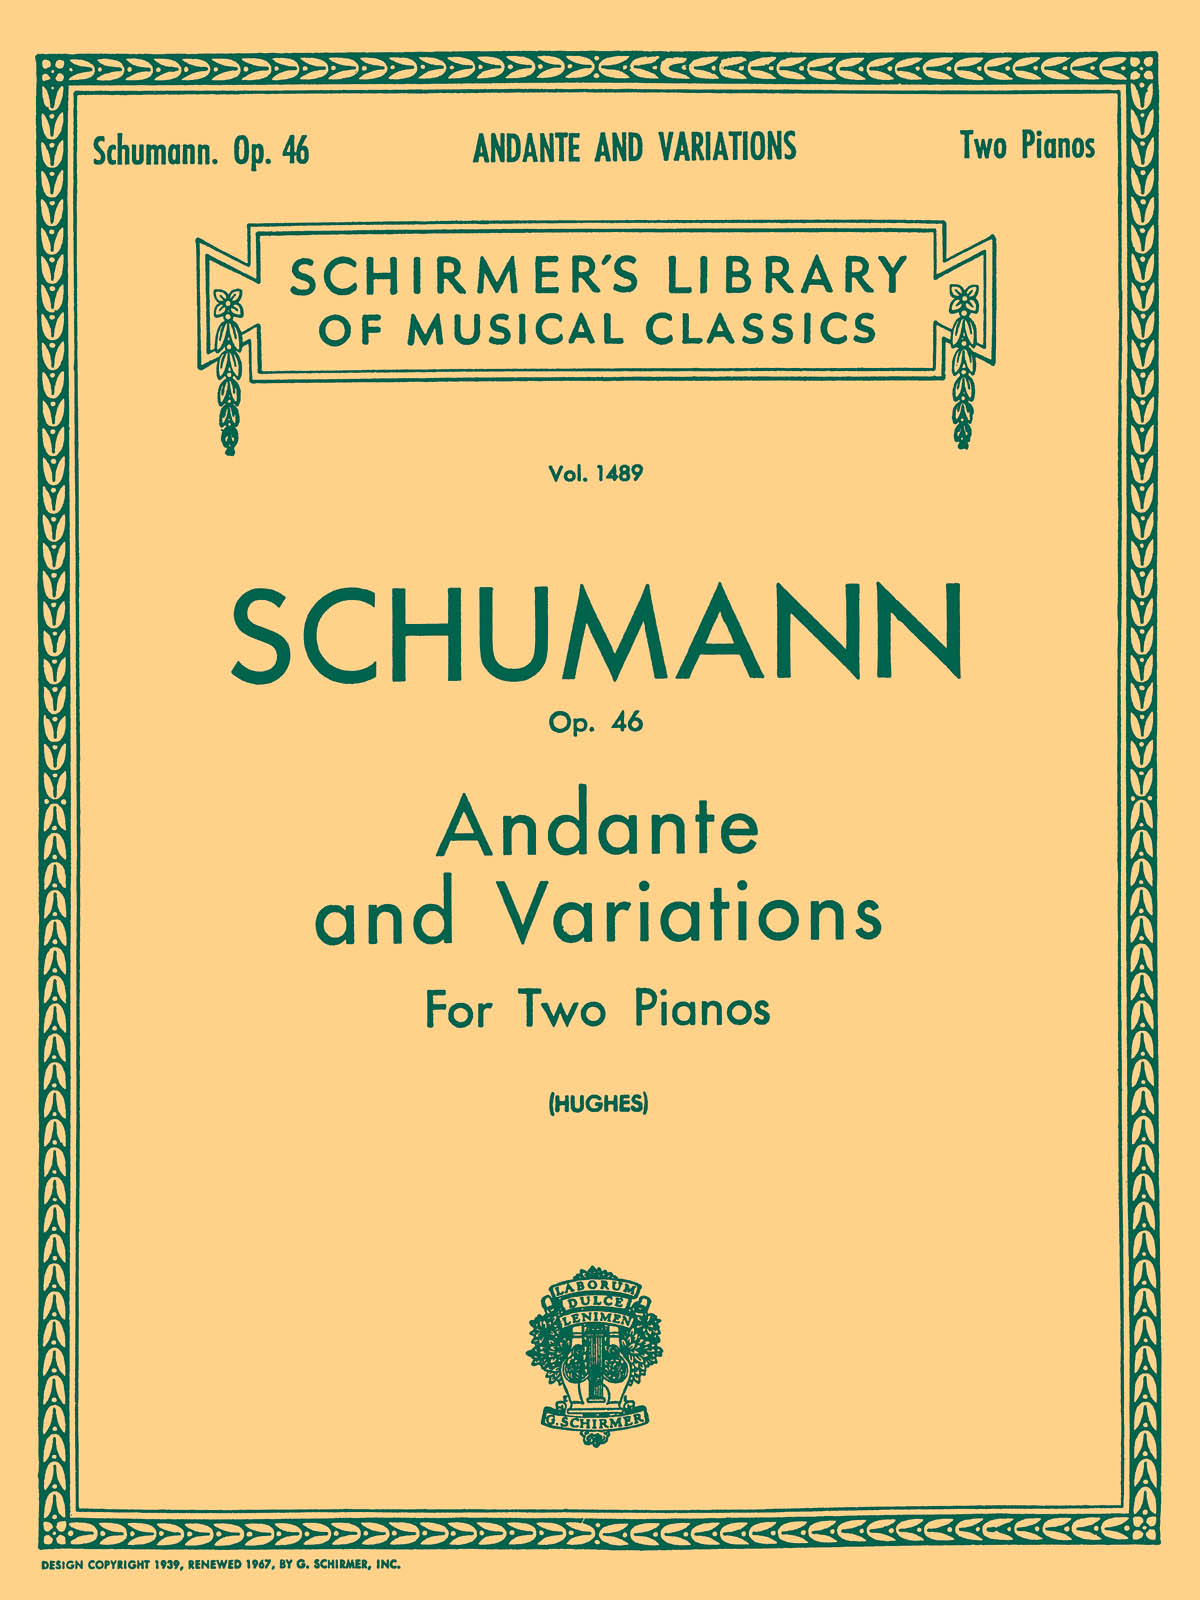 Robert Schumann: Andante And Variations Op.46 (Two Pianos)